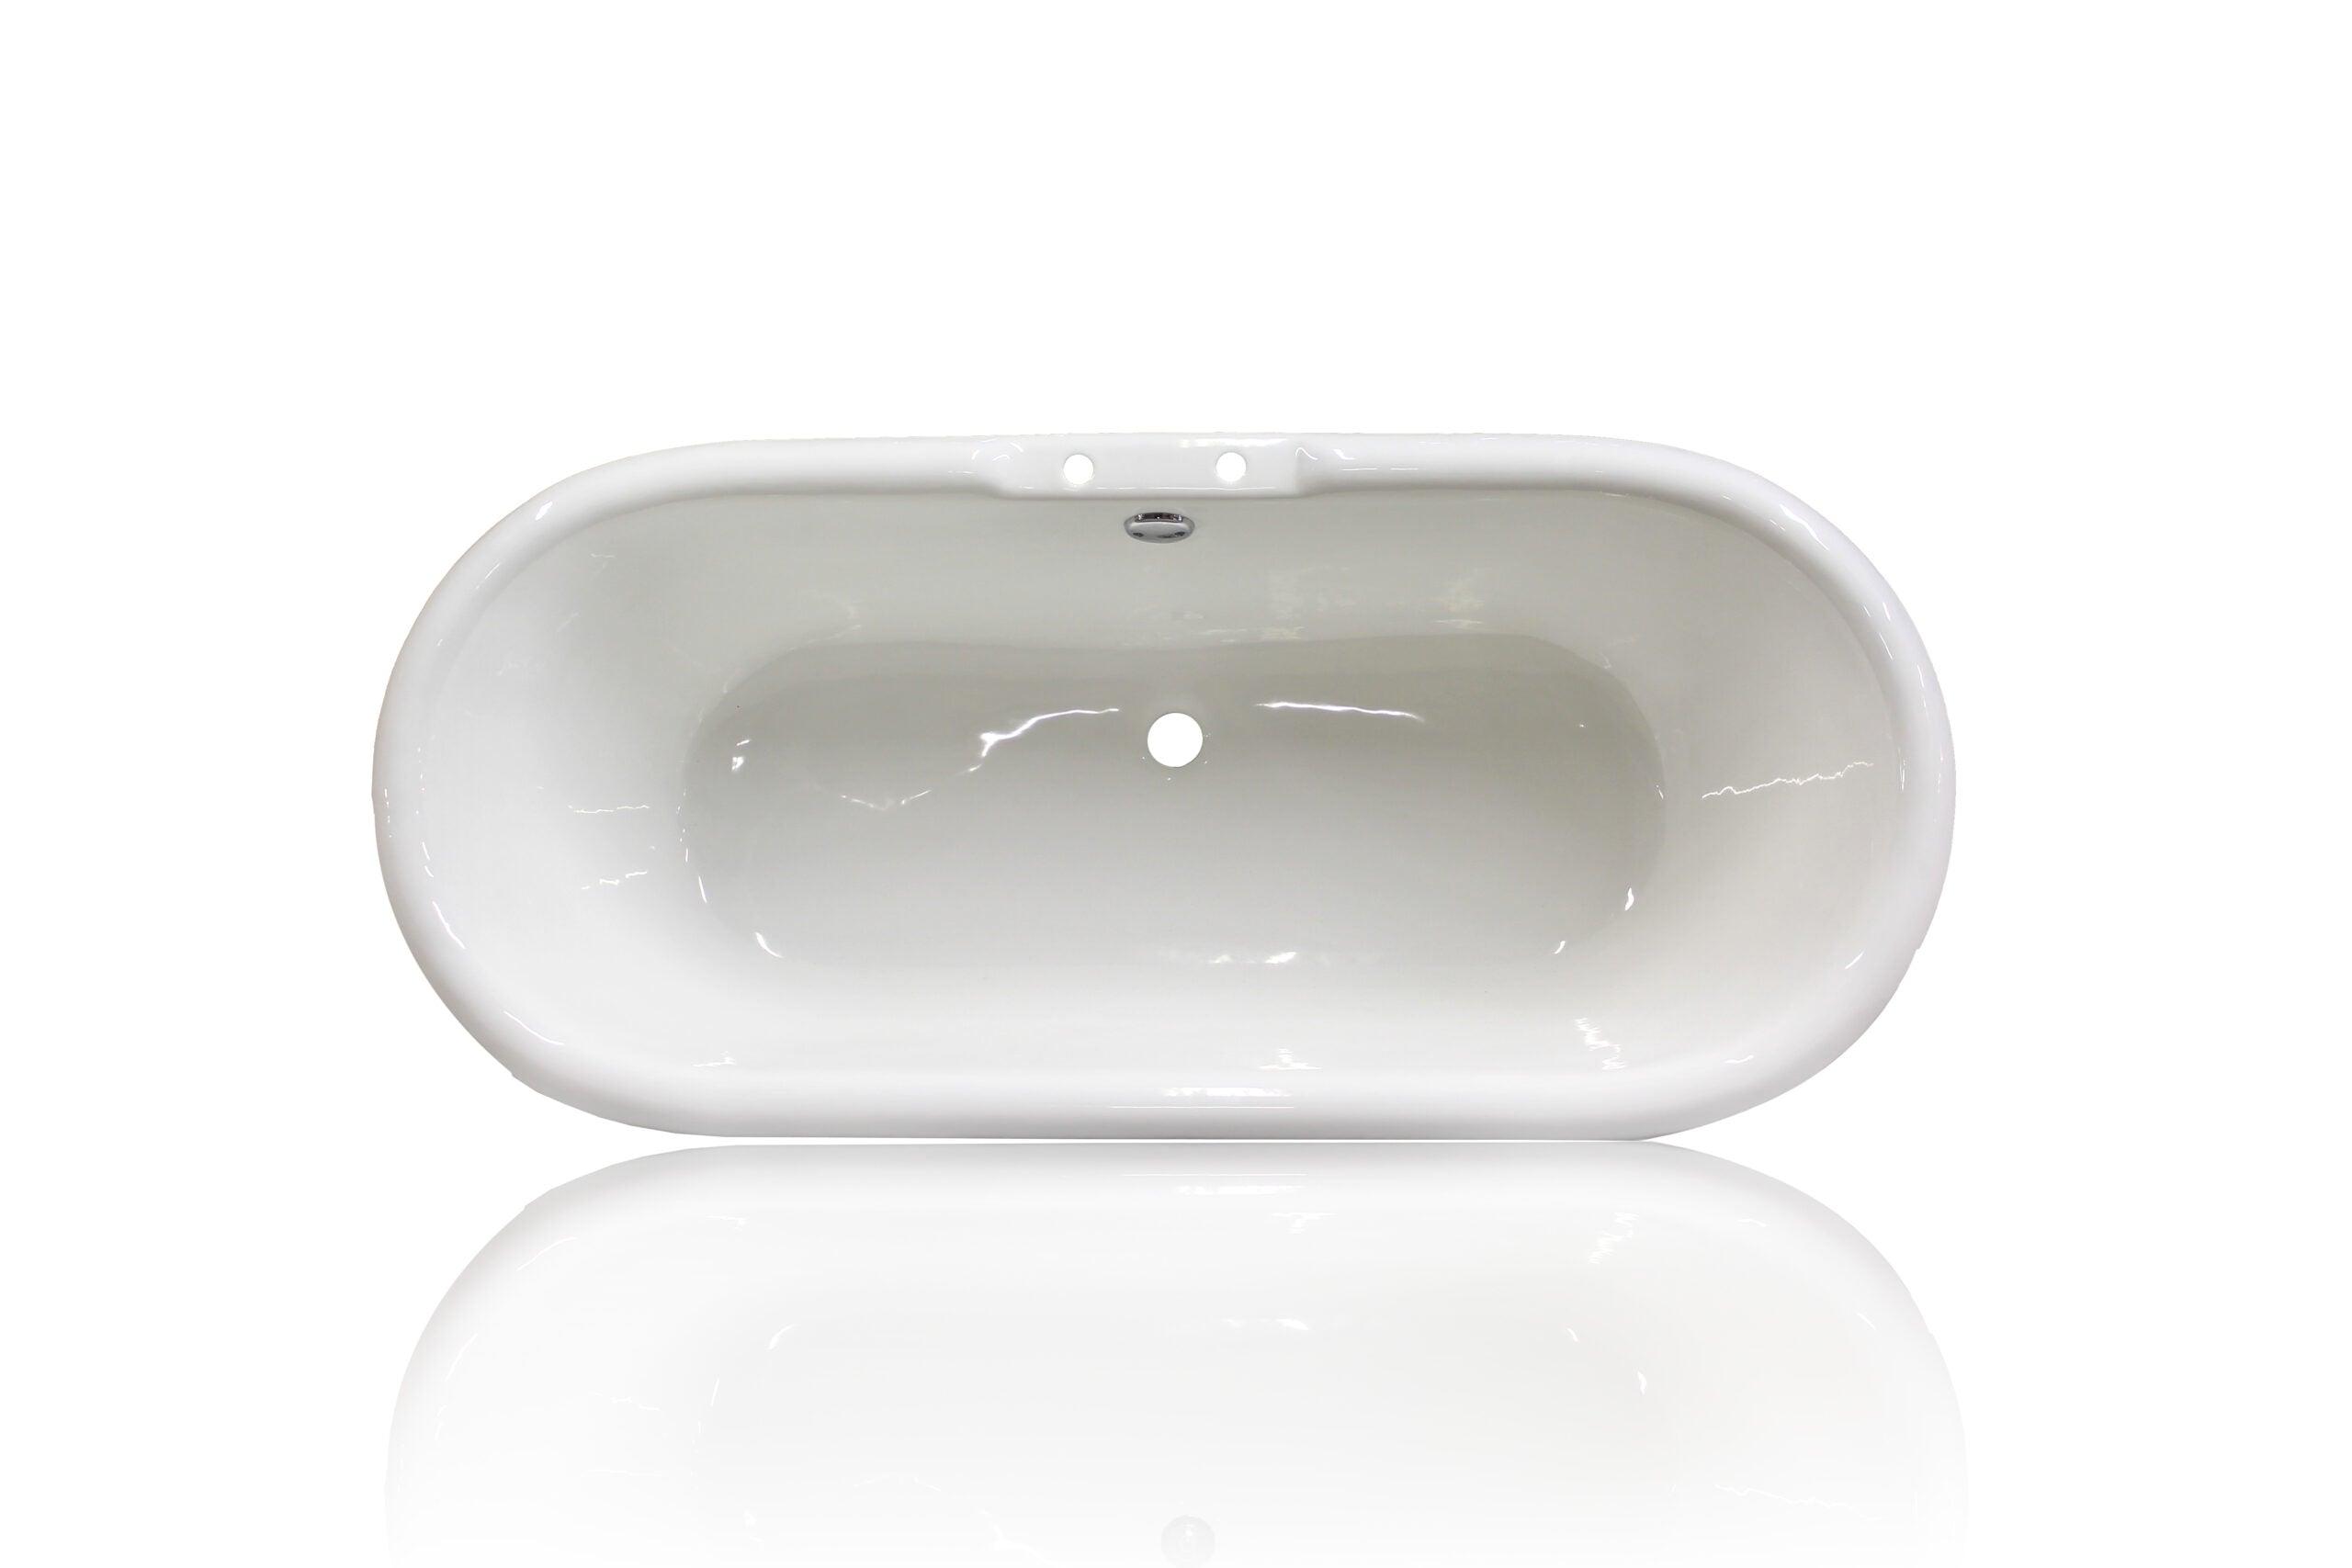 WatermarkFixtures Color Block Double 72″ Glossy White & Matte Black Antique Inspired Cast Iron Concordia Clawfoot Bathtub - Bathroom Design Center